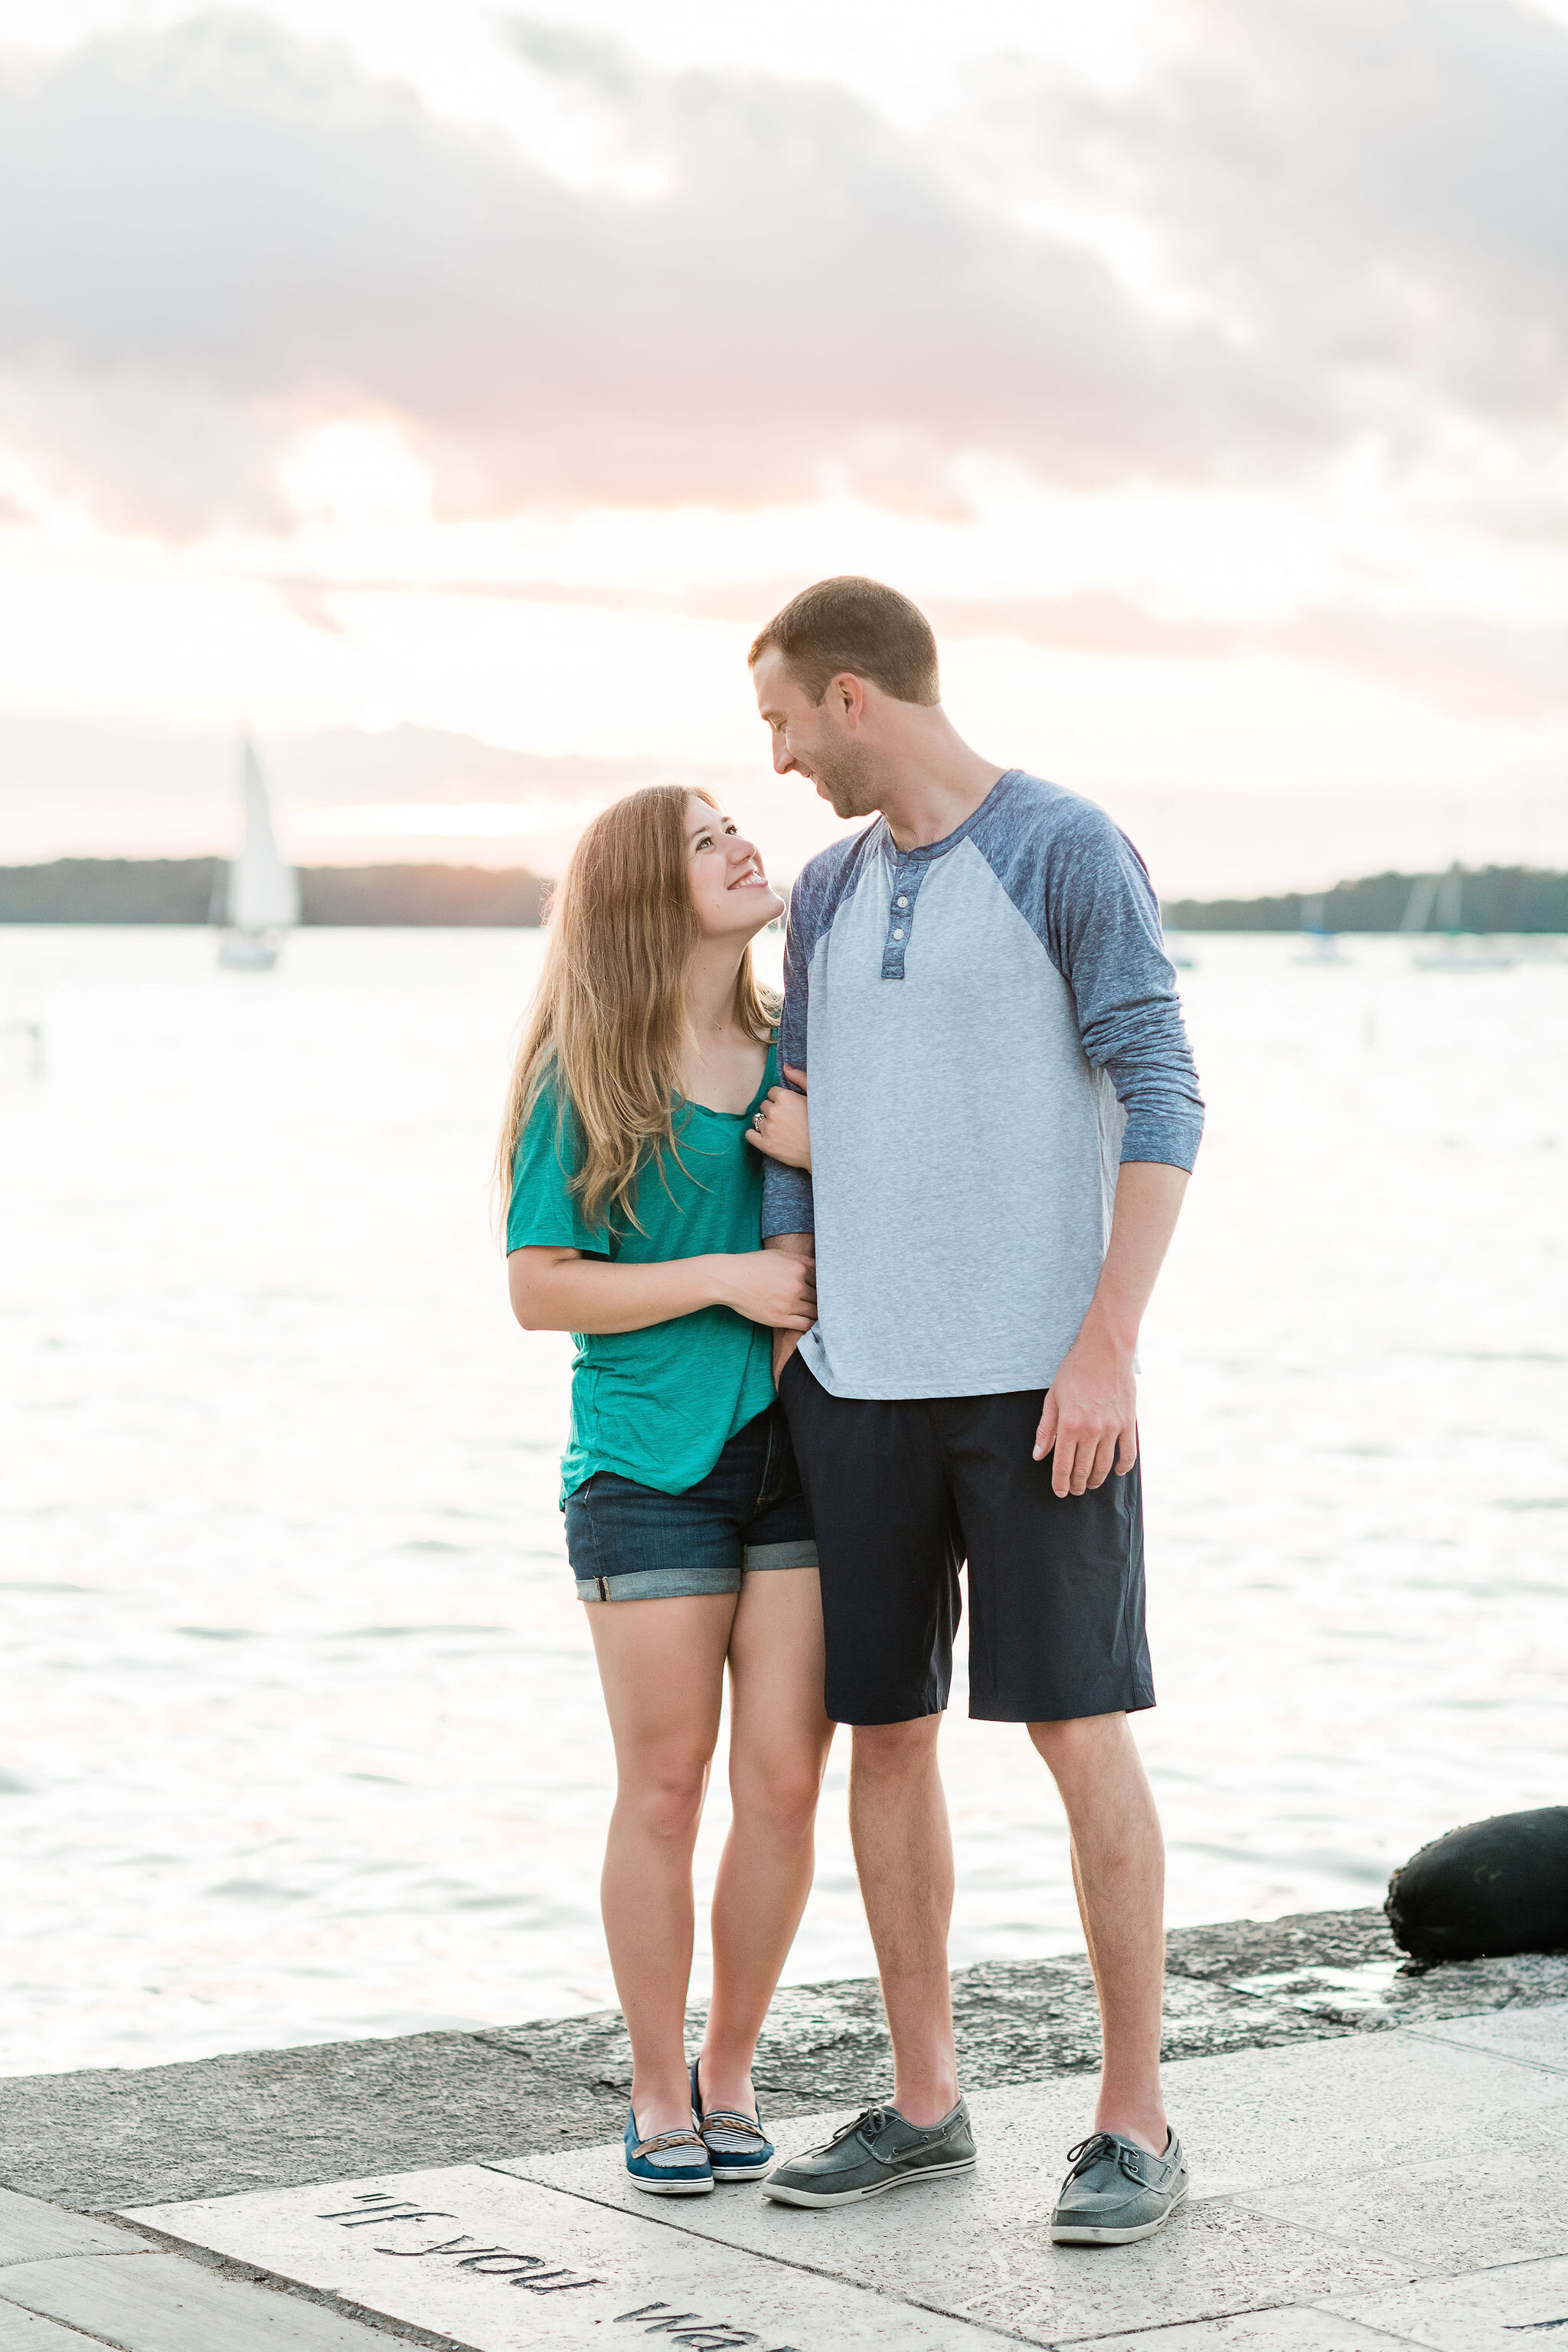 Engaged couple on a dock with a sailboat in the background